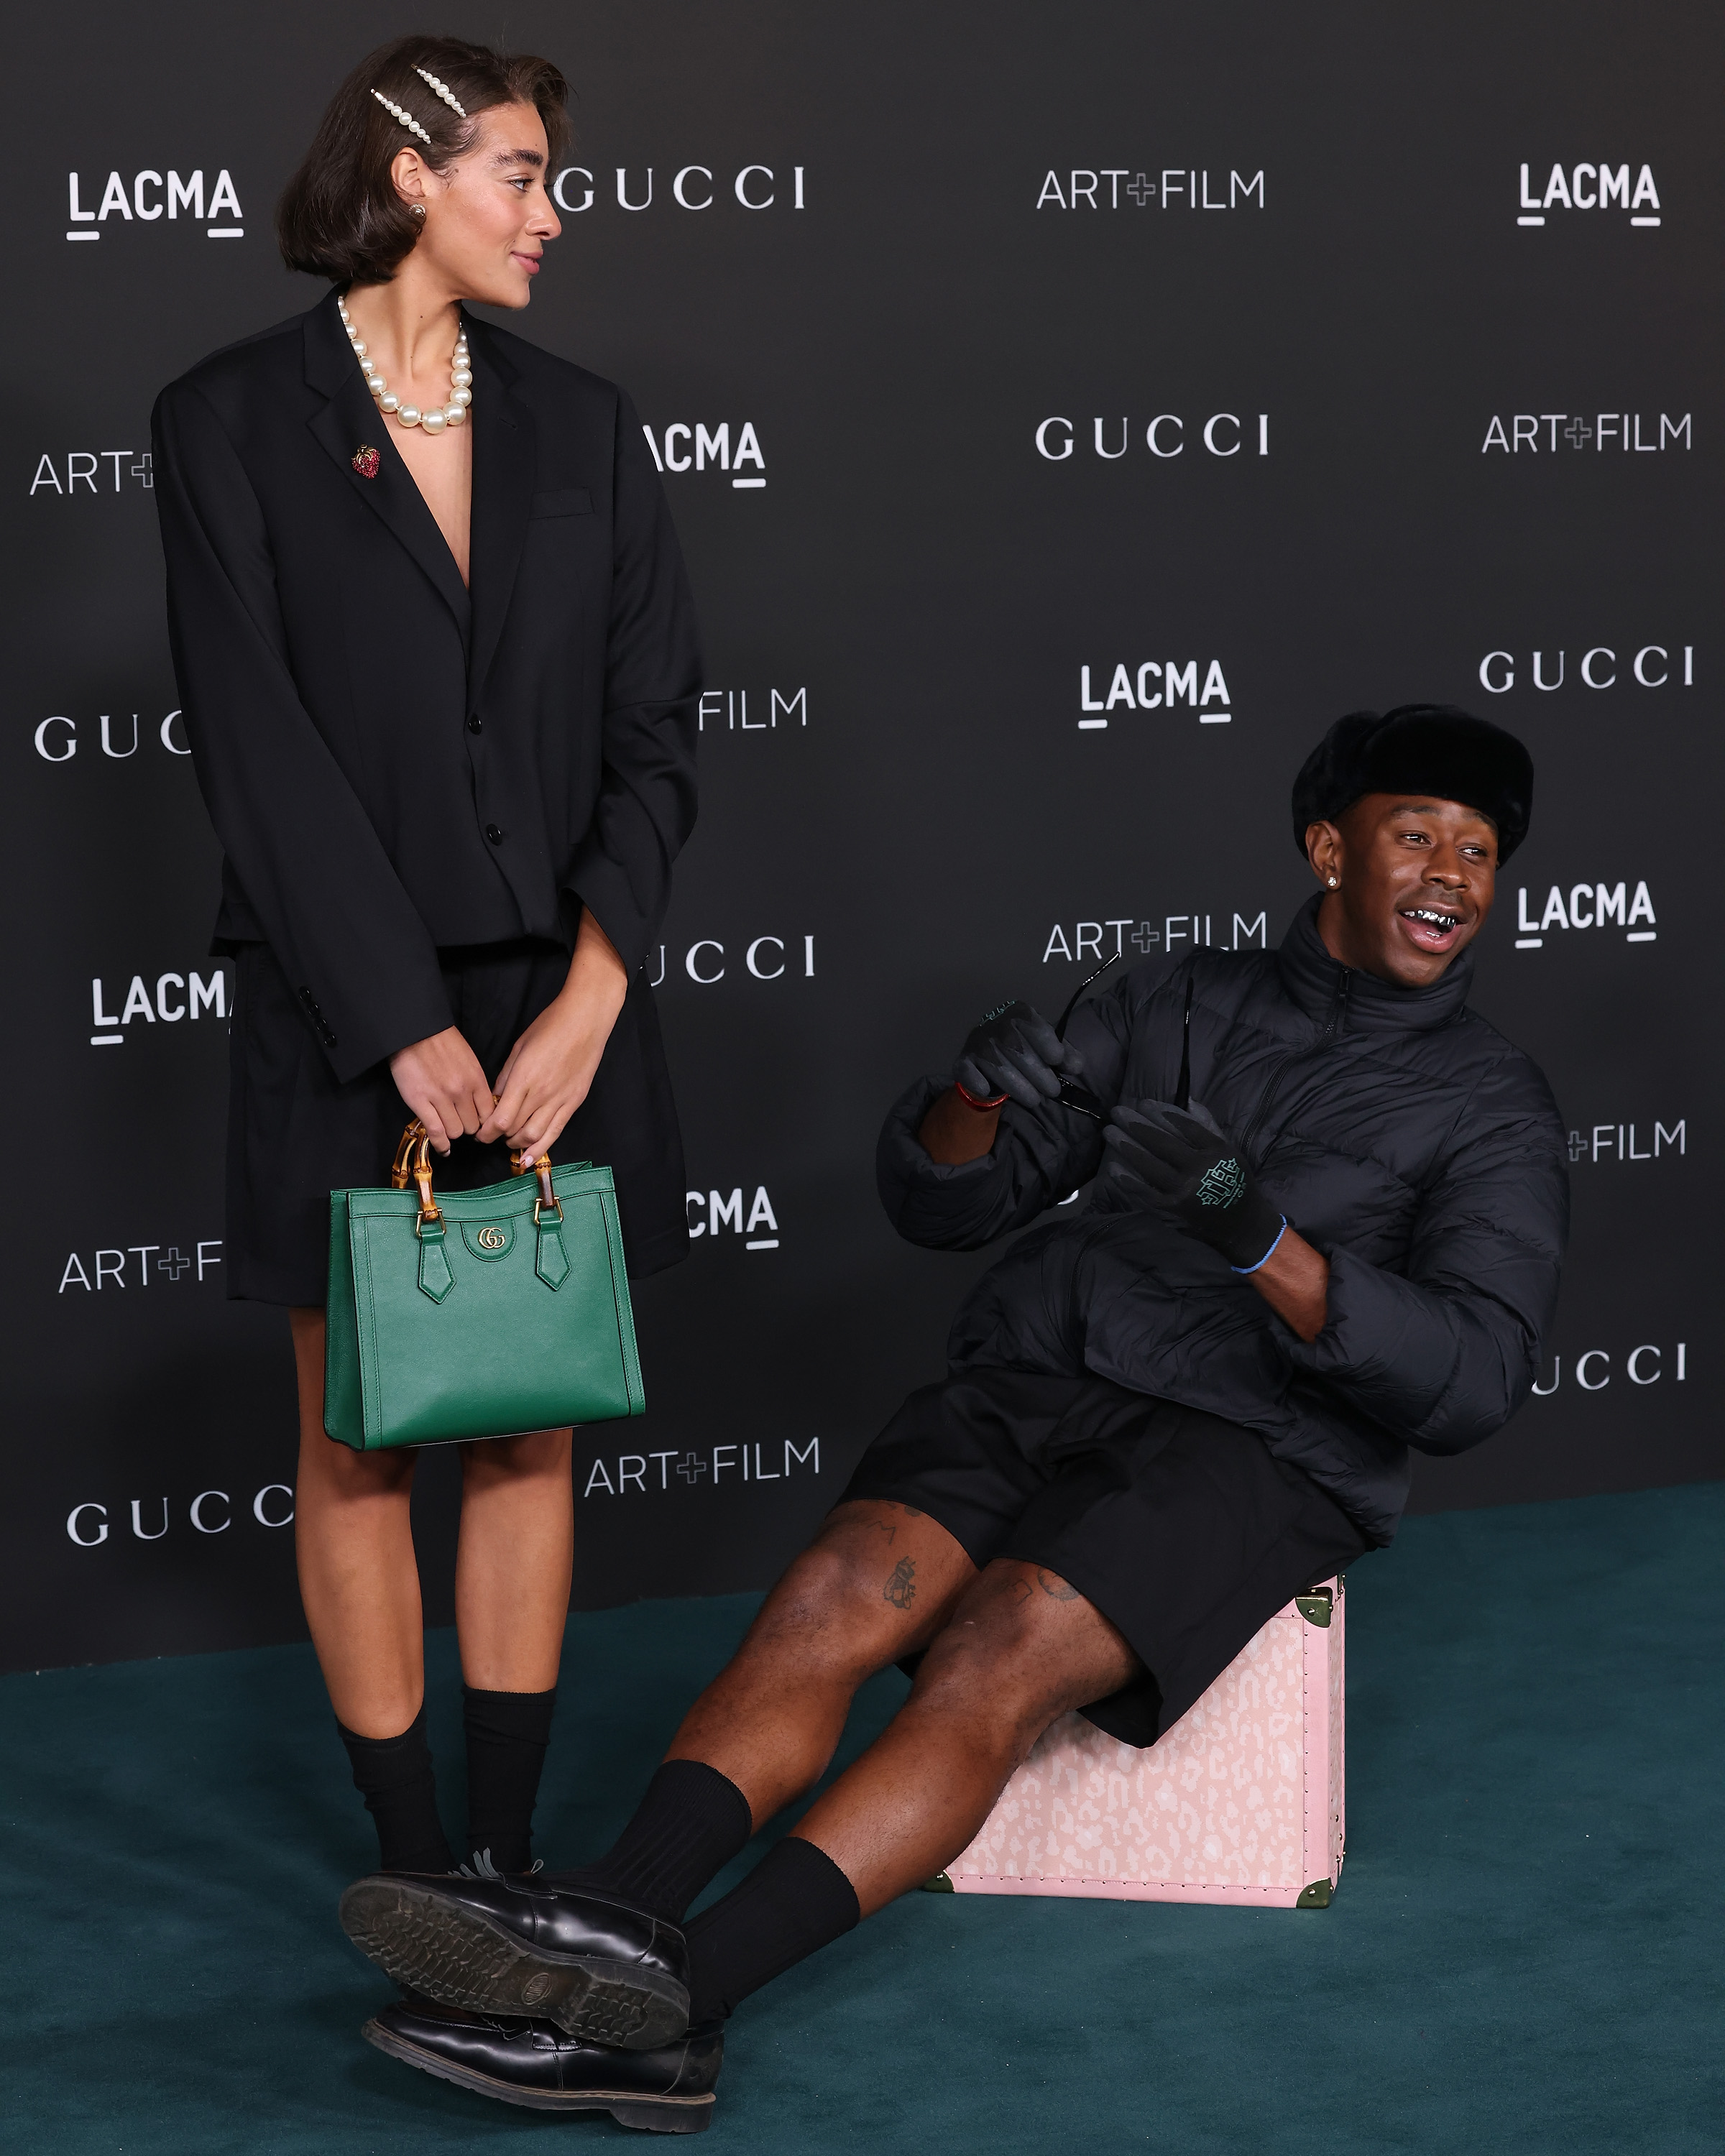 Reign Judge and Tyler, the Creator attend the 2021 LACMA Art + Film Gala at Los Angeles County Museum of Art on November 6, 2021 in Los Angeles, California. | Source: Getty Images